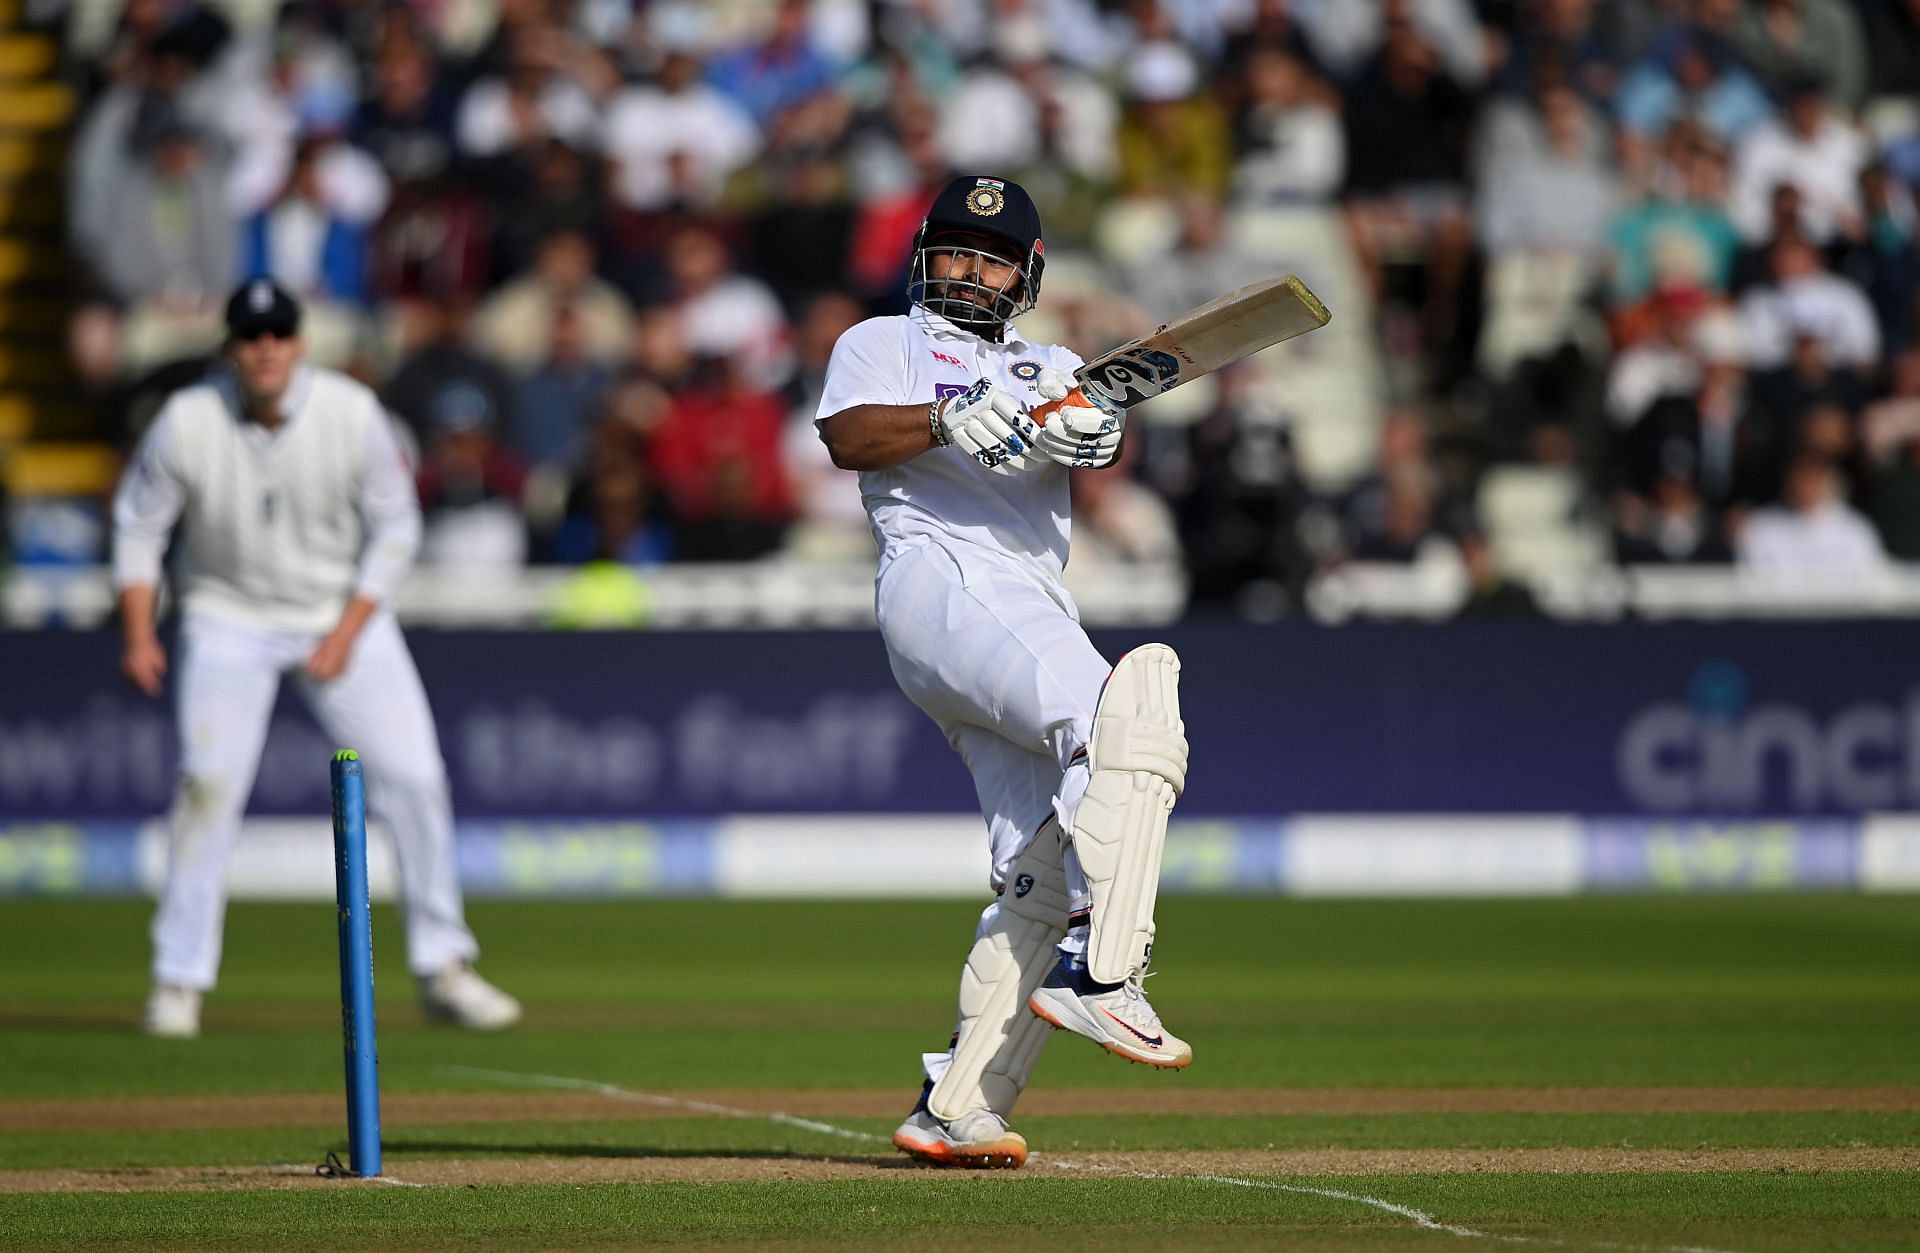 Rishabh Pant scored his third Test hundred against England on Day 1 in Edgbaston